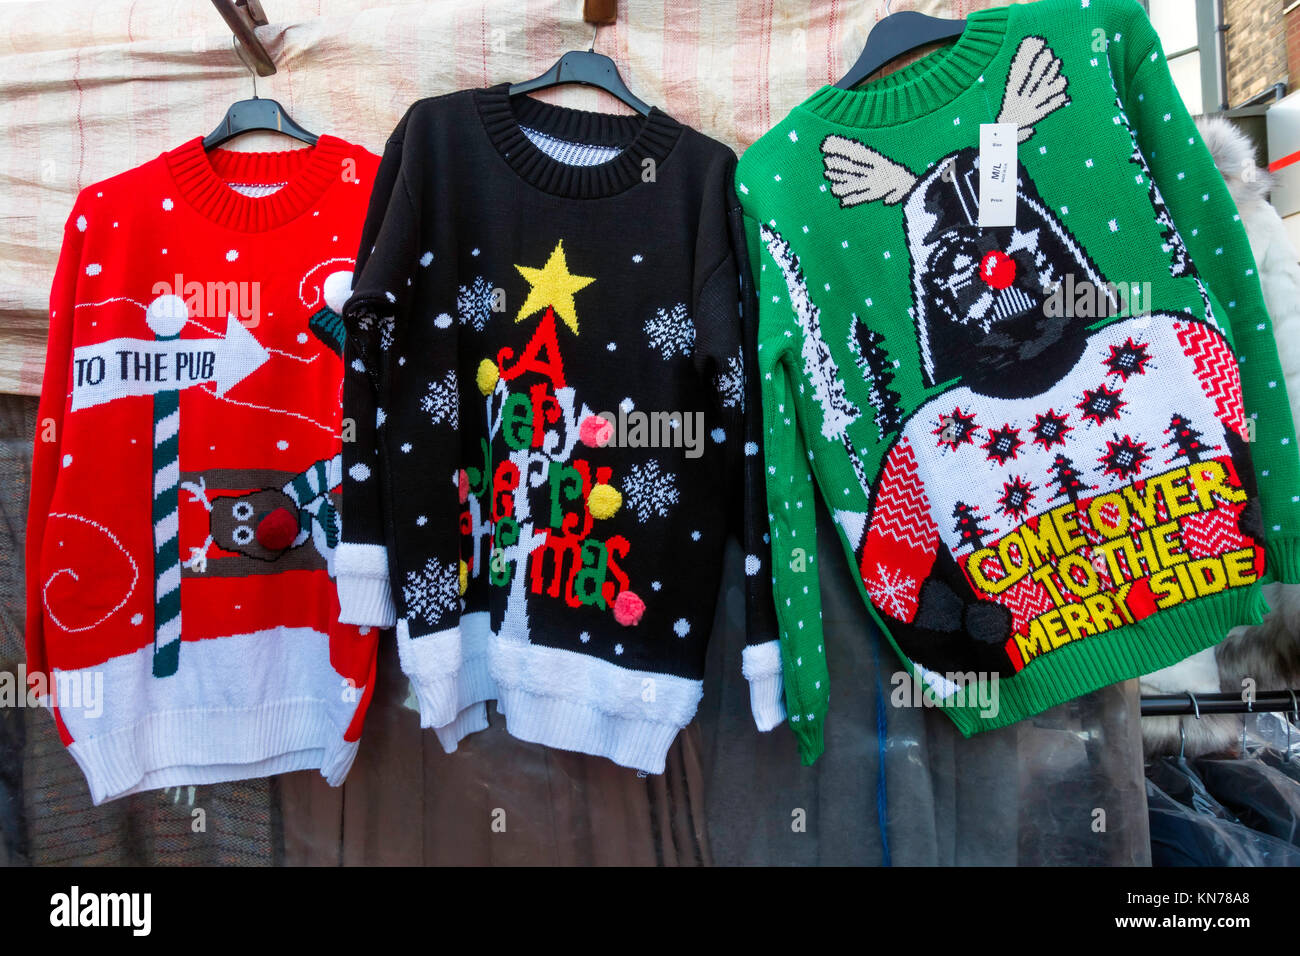 Market stall Christmas novelty sale  knitted jumpers with pub and reindeer patterns Stock Photo